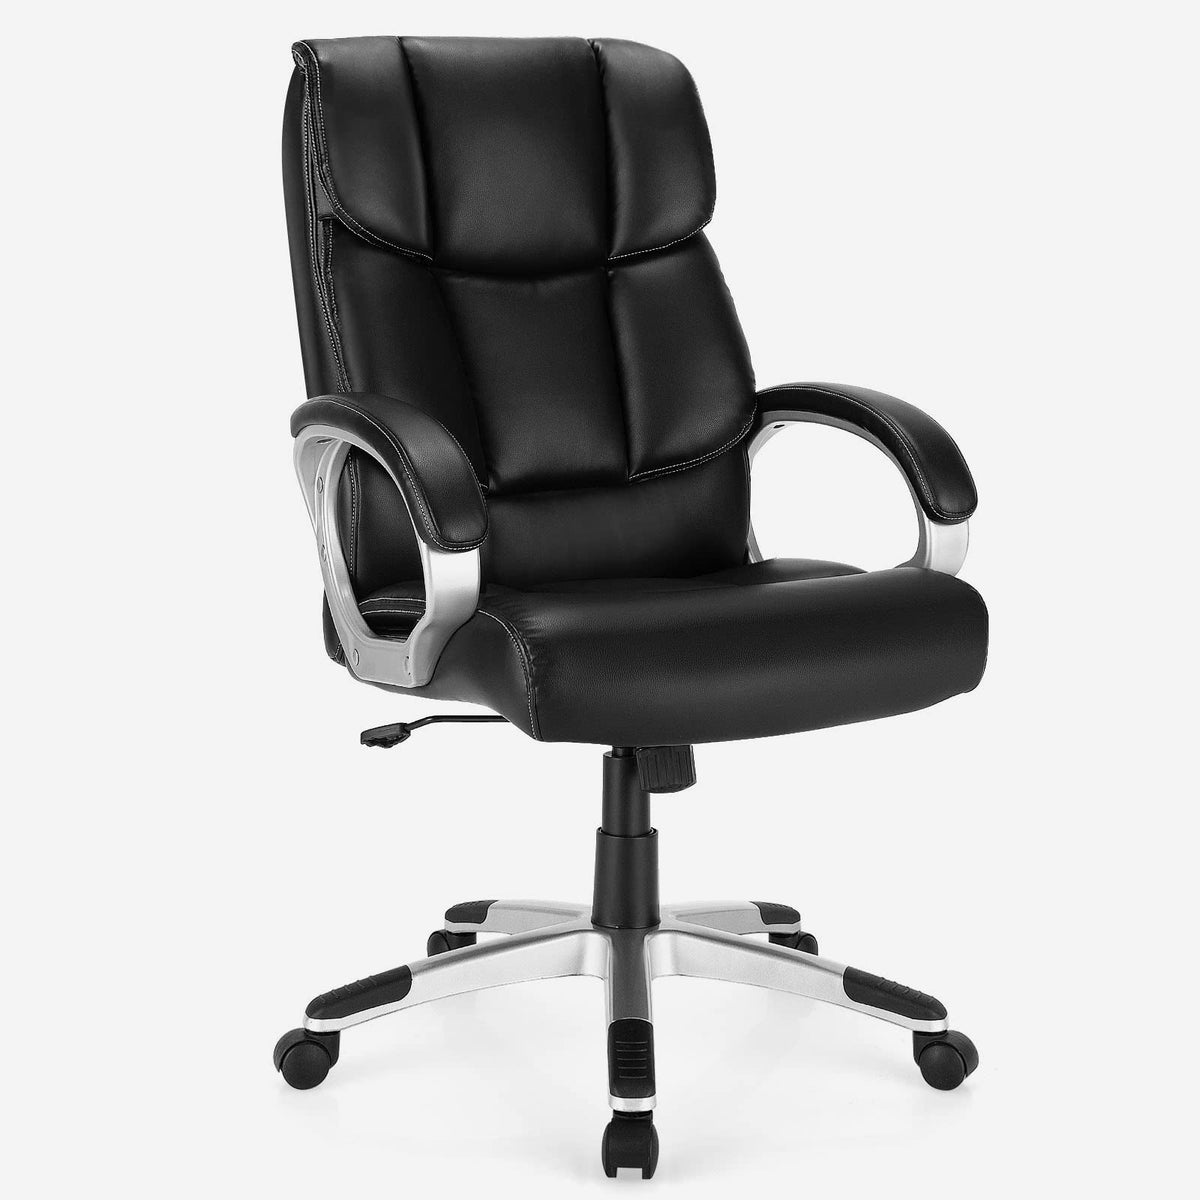 Giantex Big & Tall Executive Office Chair, Height Adjustable Leather Executive Chair, 136kg Load Capacity, Black